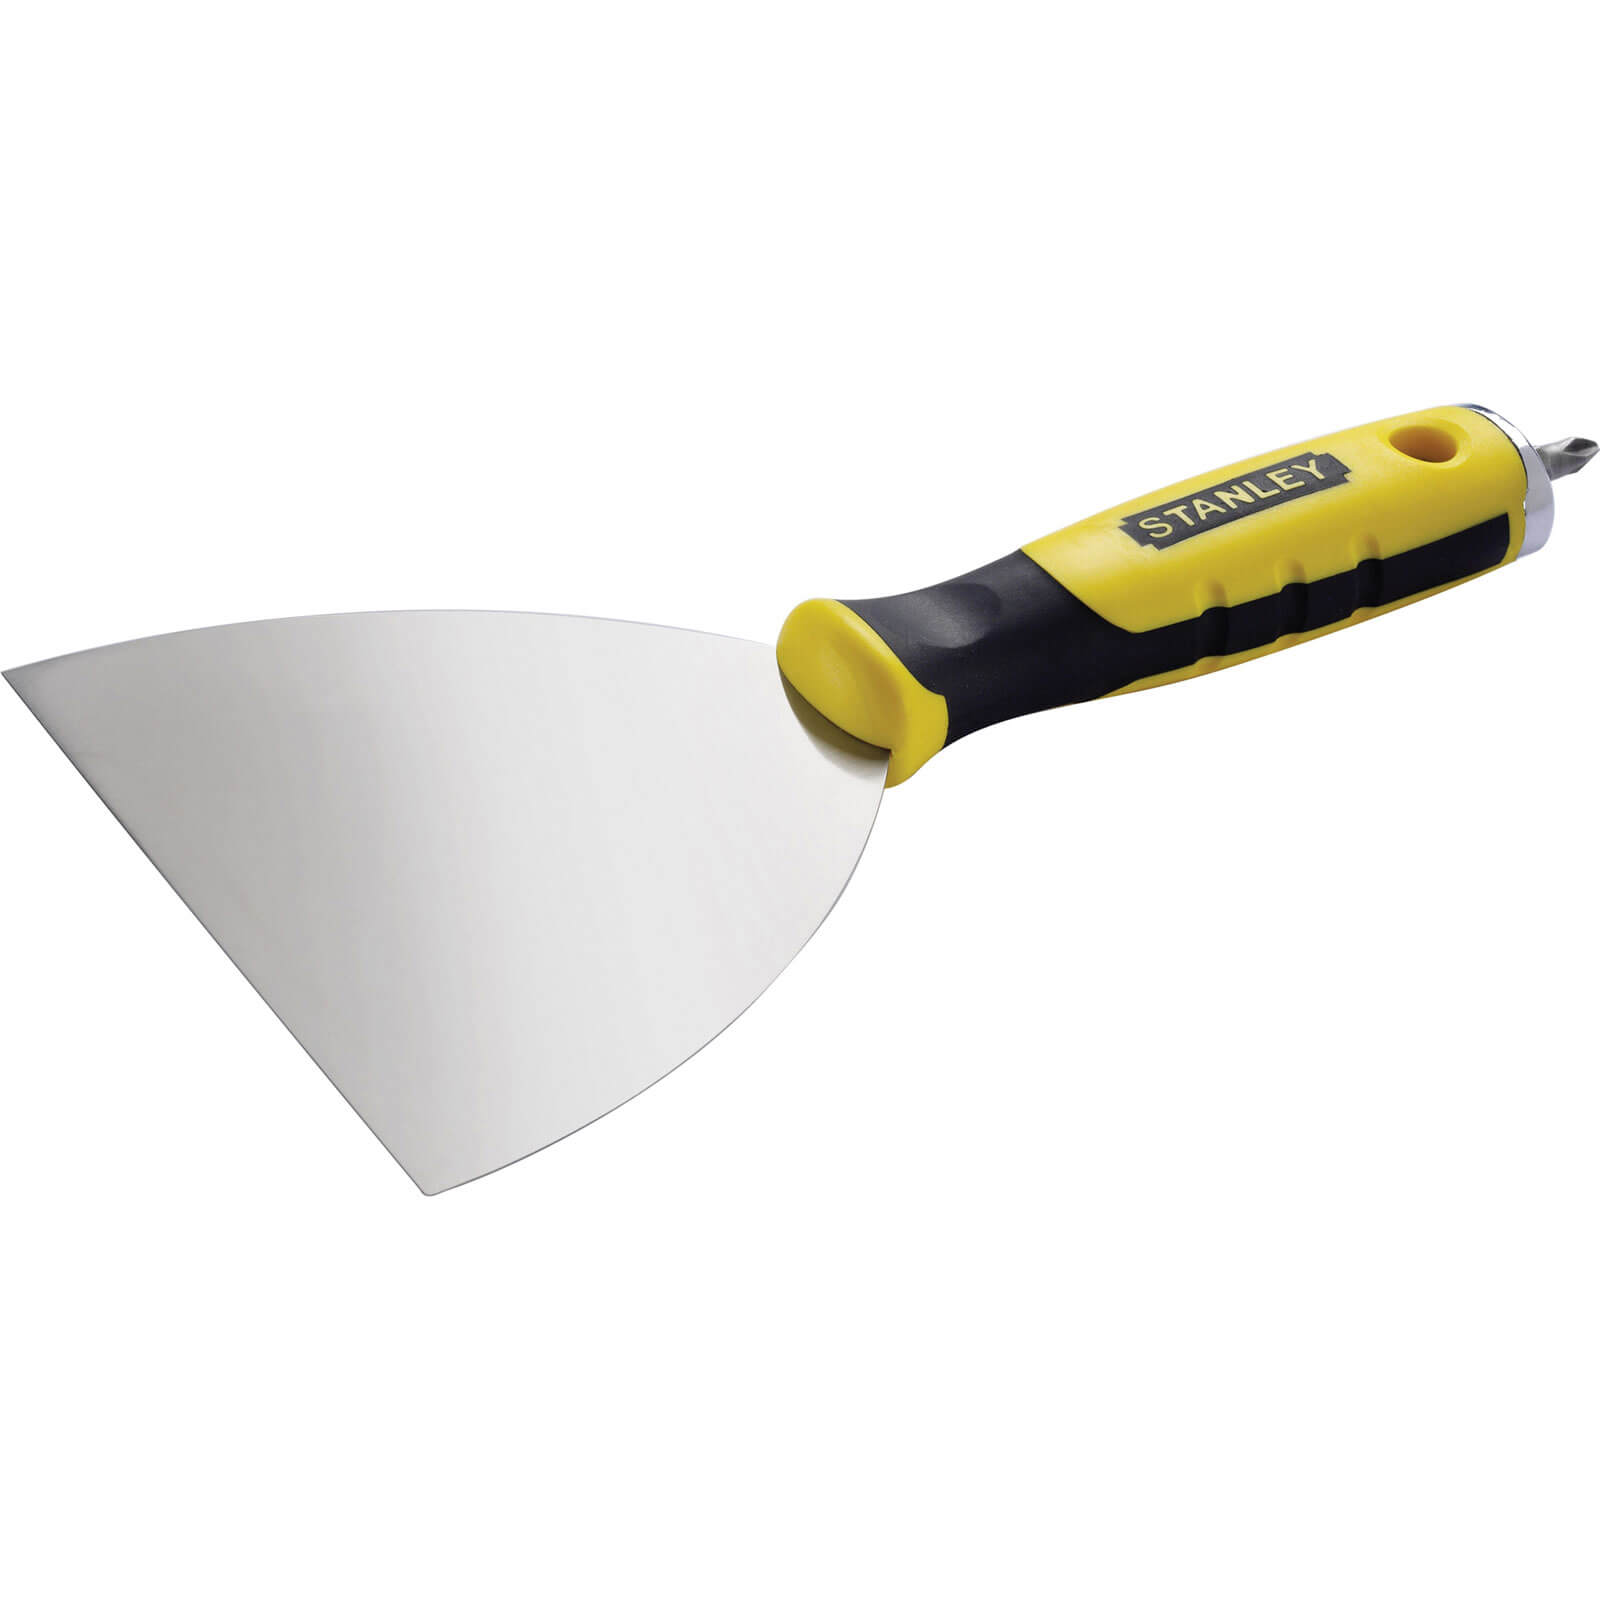 Image of Stanley Stainless Steel Joint Knife with PH2 Bit 100mm